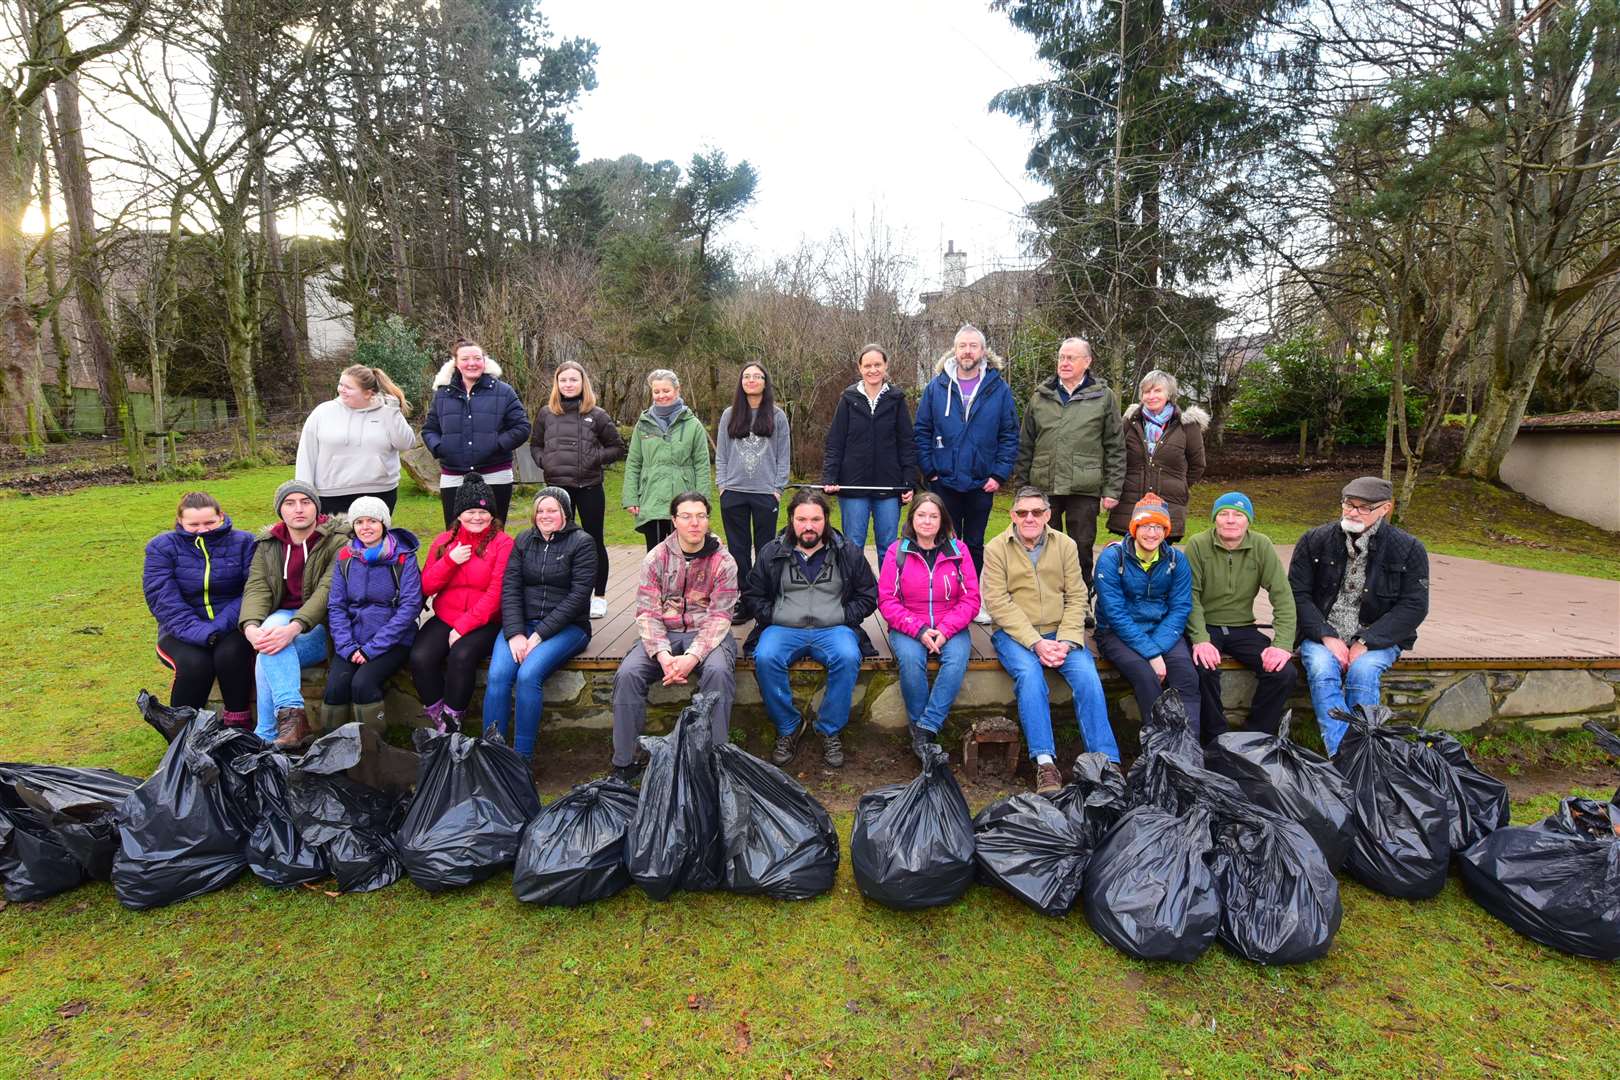 Premier Inn staff have already been contributing to the communityin Aviemore be assiting with a litter pick earlier this week.